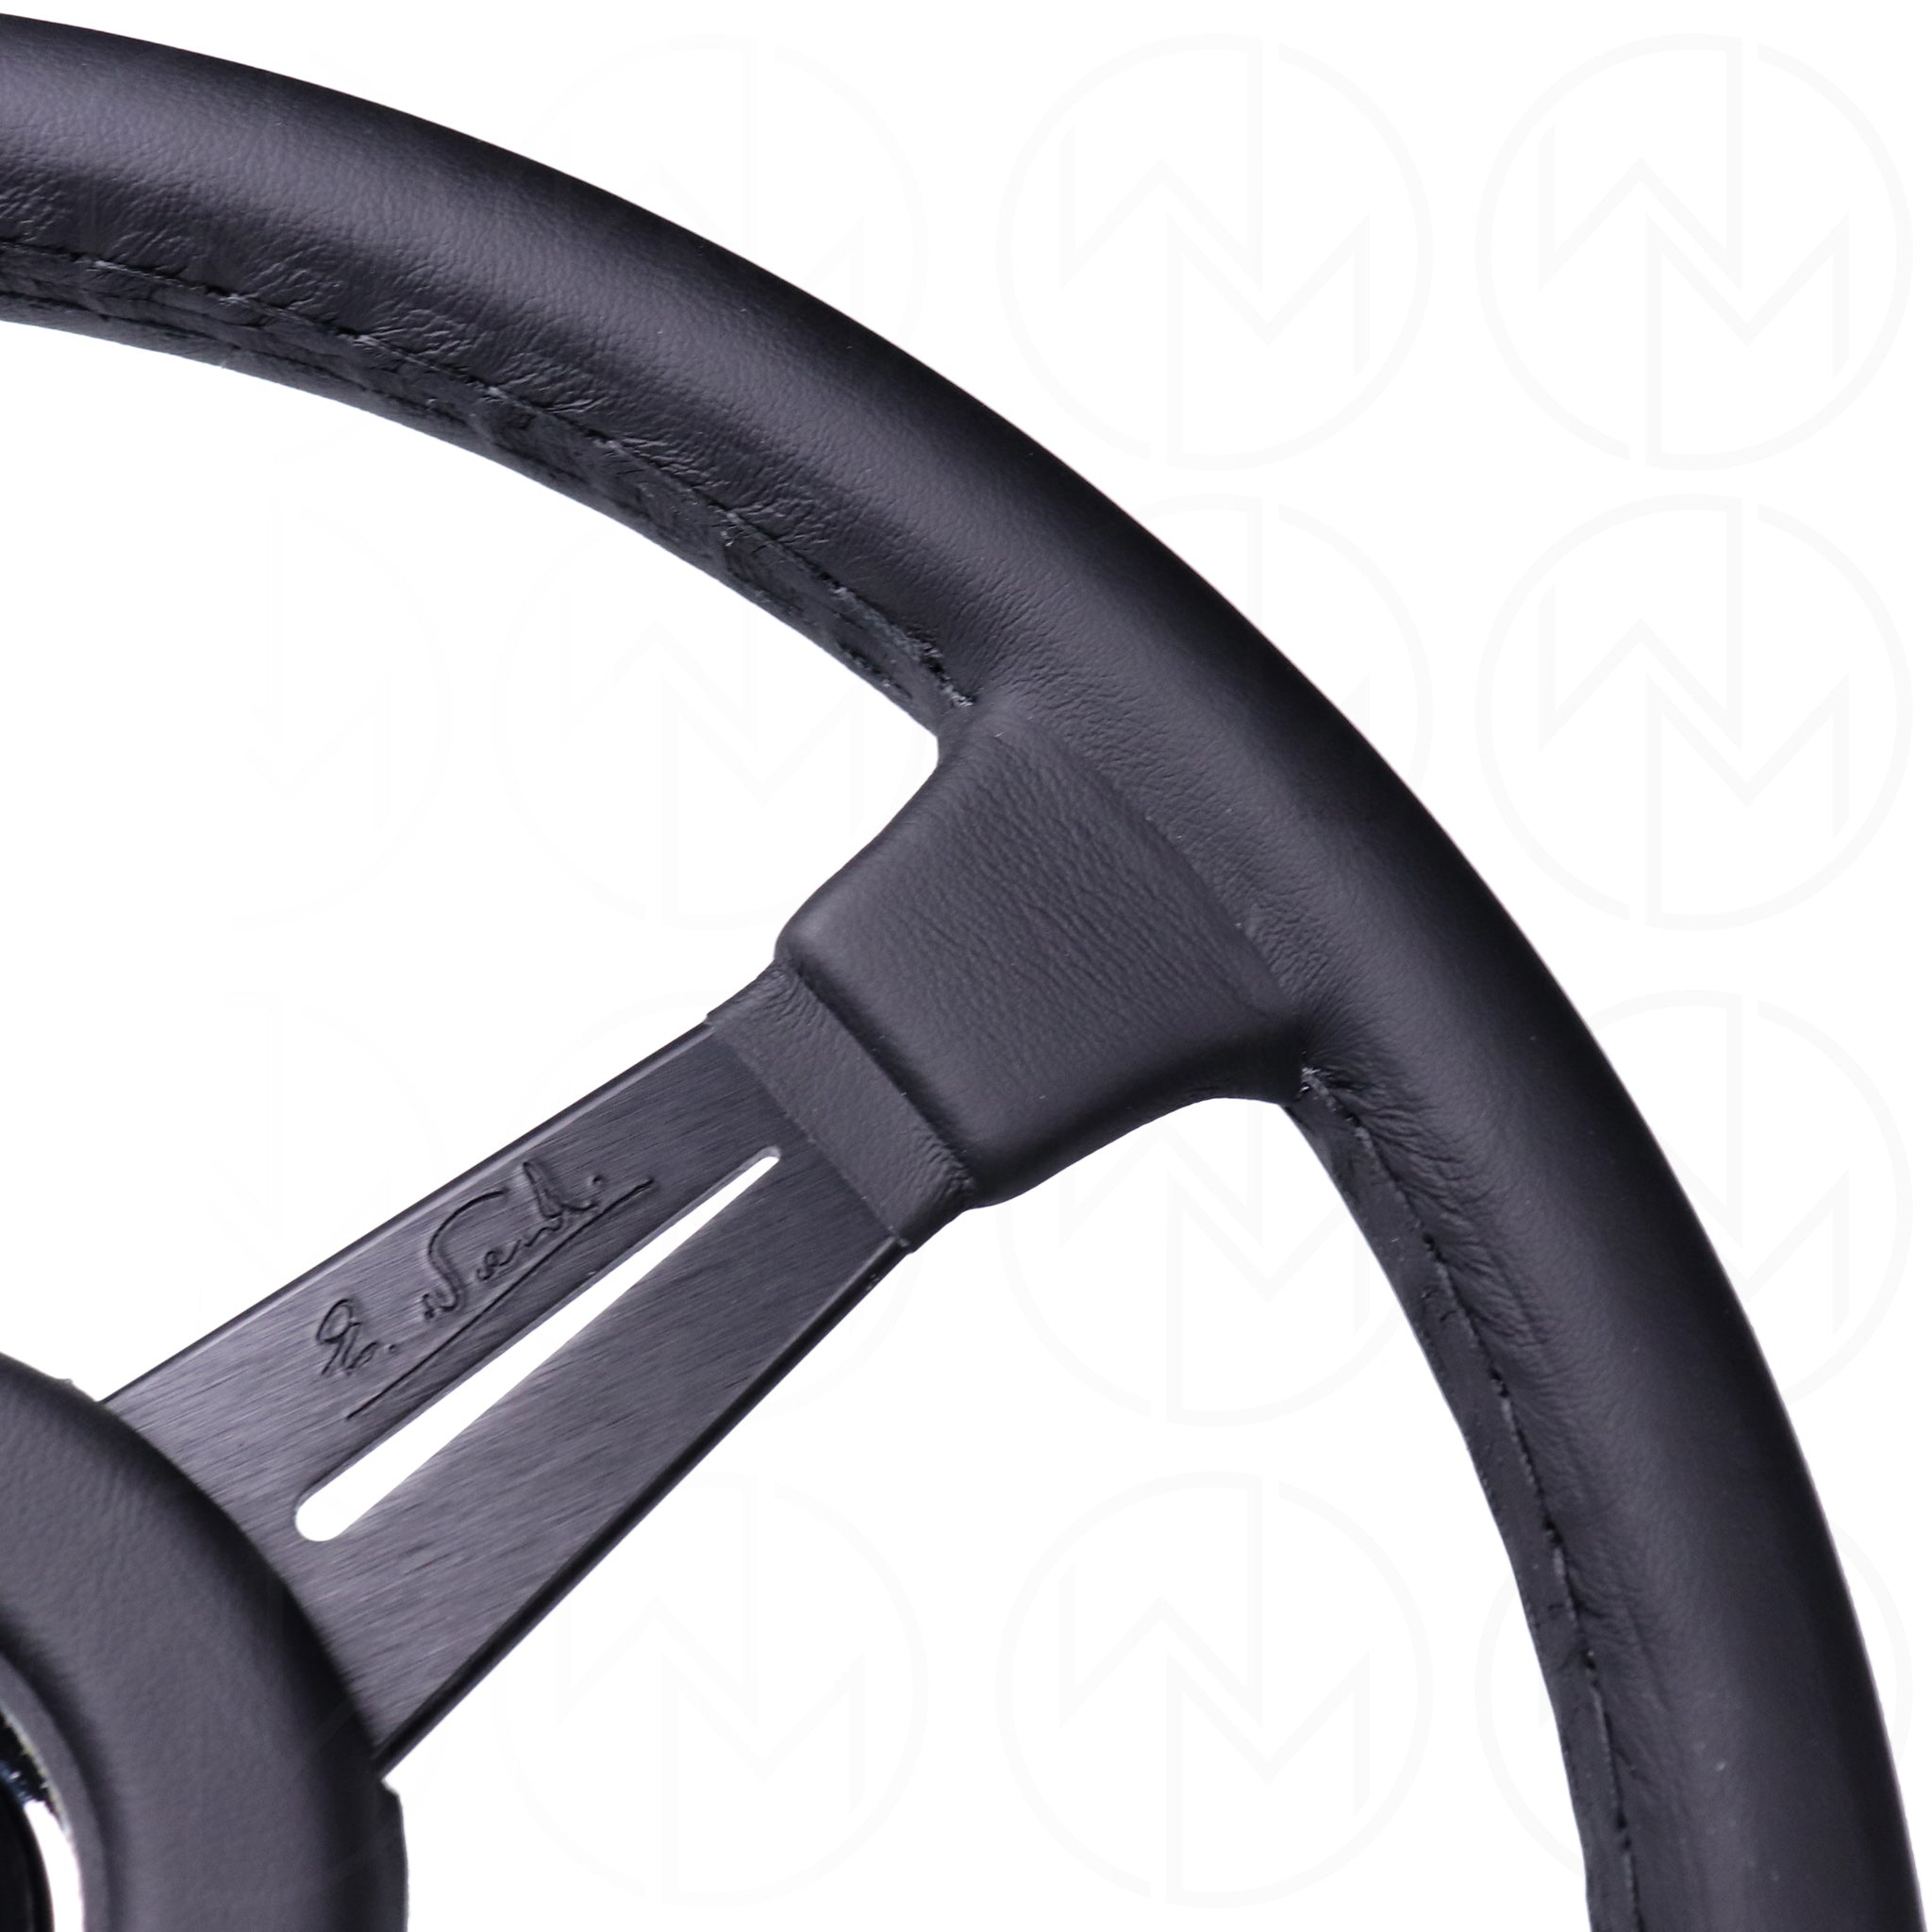 Nardi Classic Steering Wheel - 365mm Leather w/Black Spoke & Leather Ring and Black Stitch